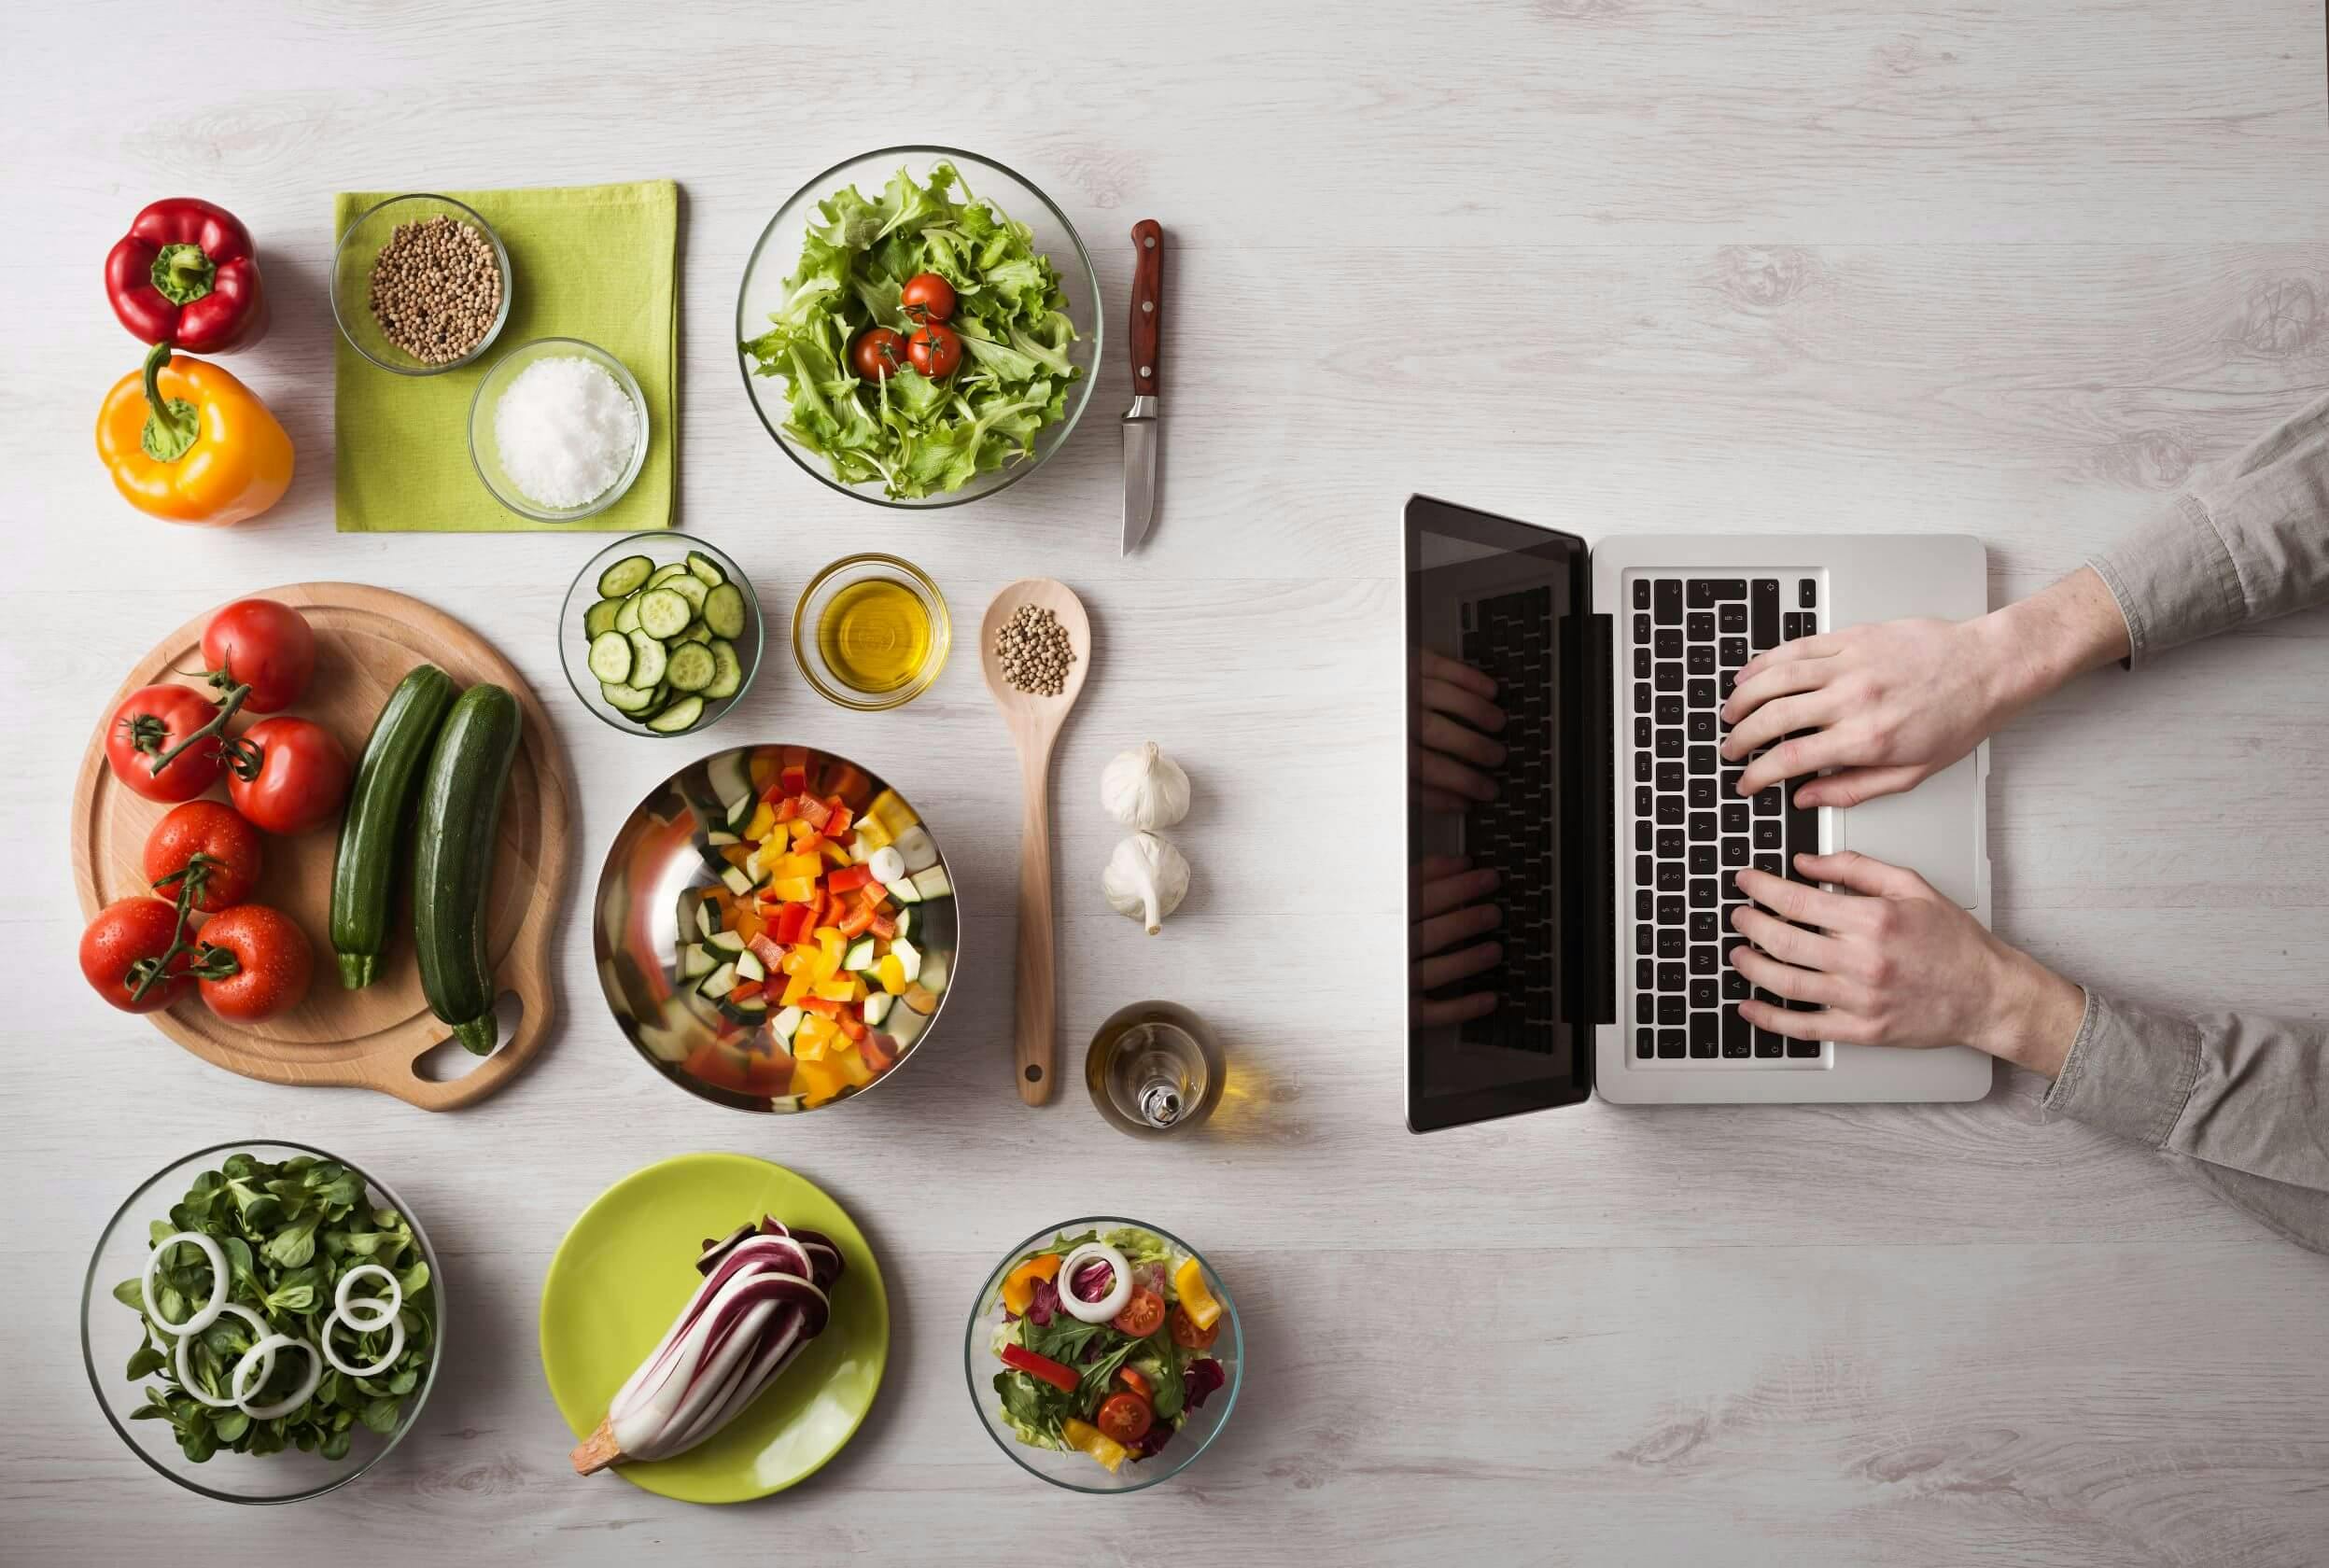 Healthy Foods Benefiting the Workplace